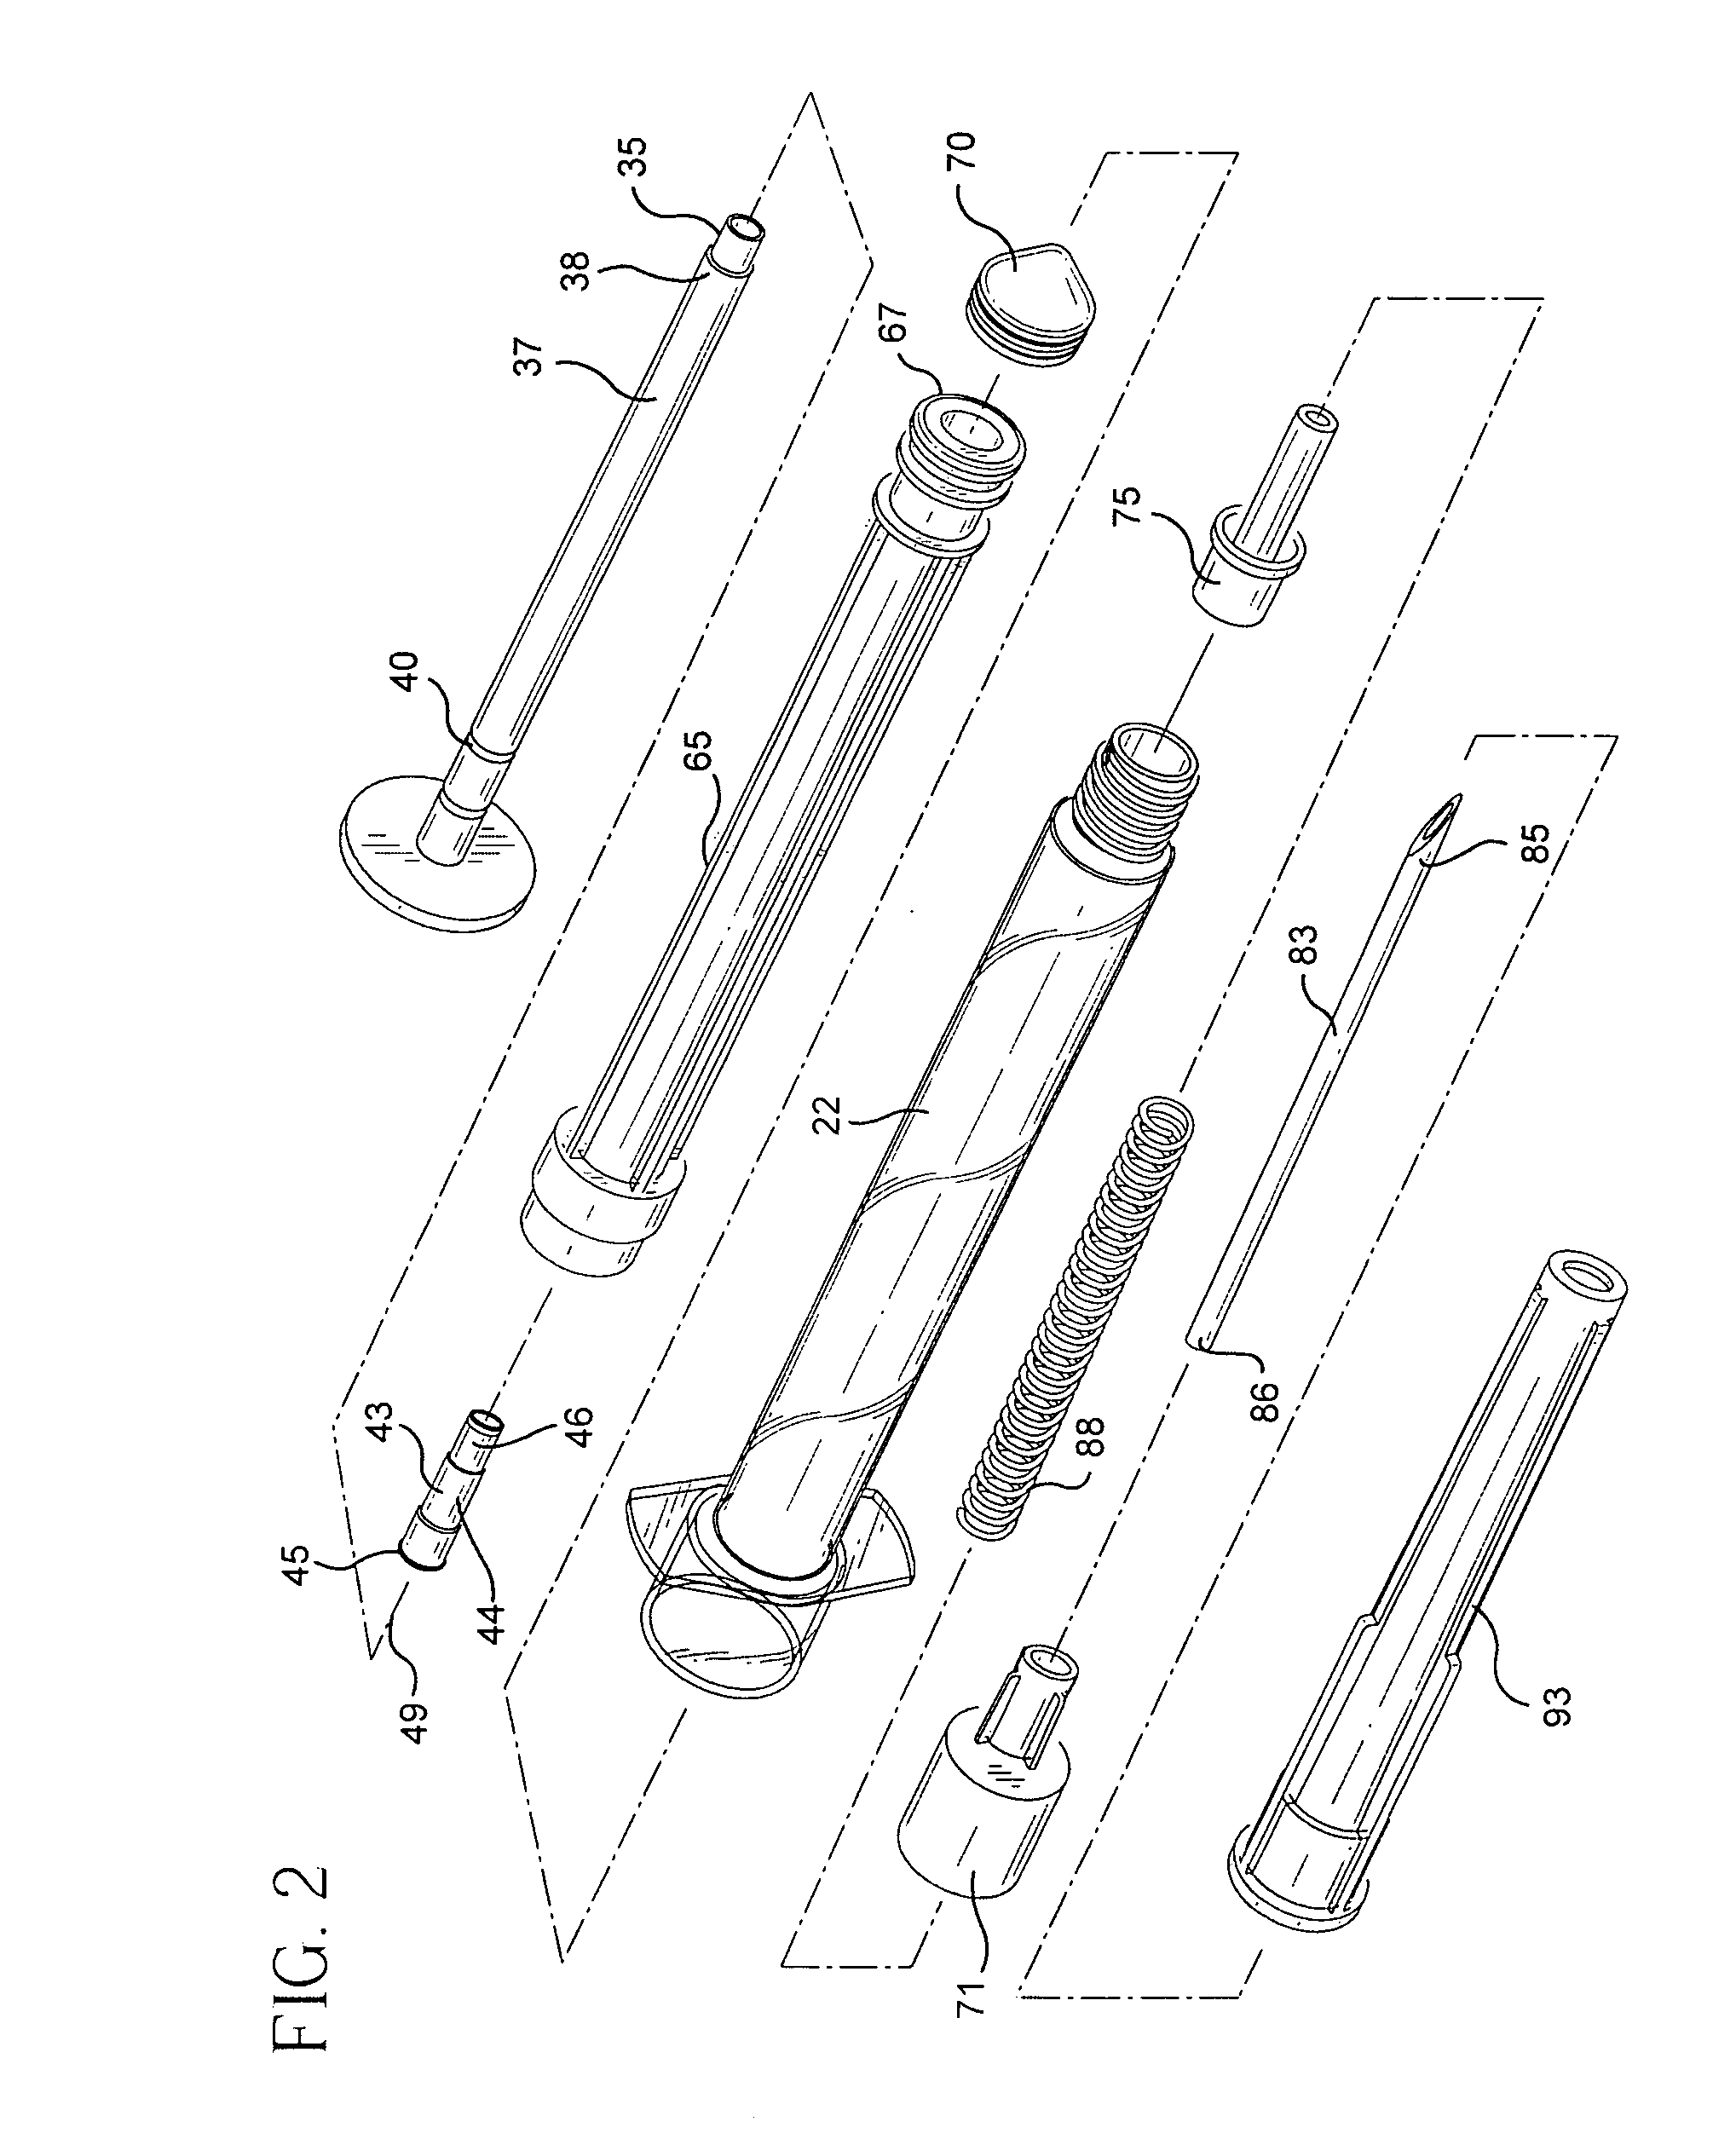 Cutting element for a retracting needle syringe